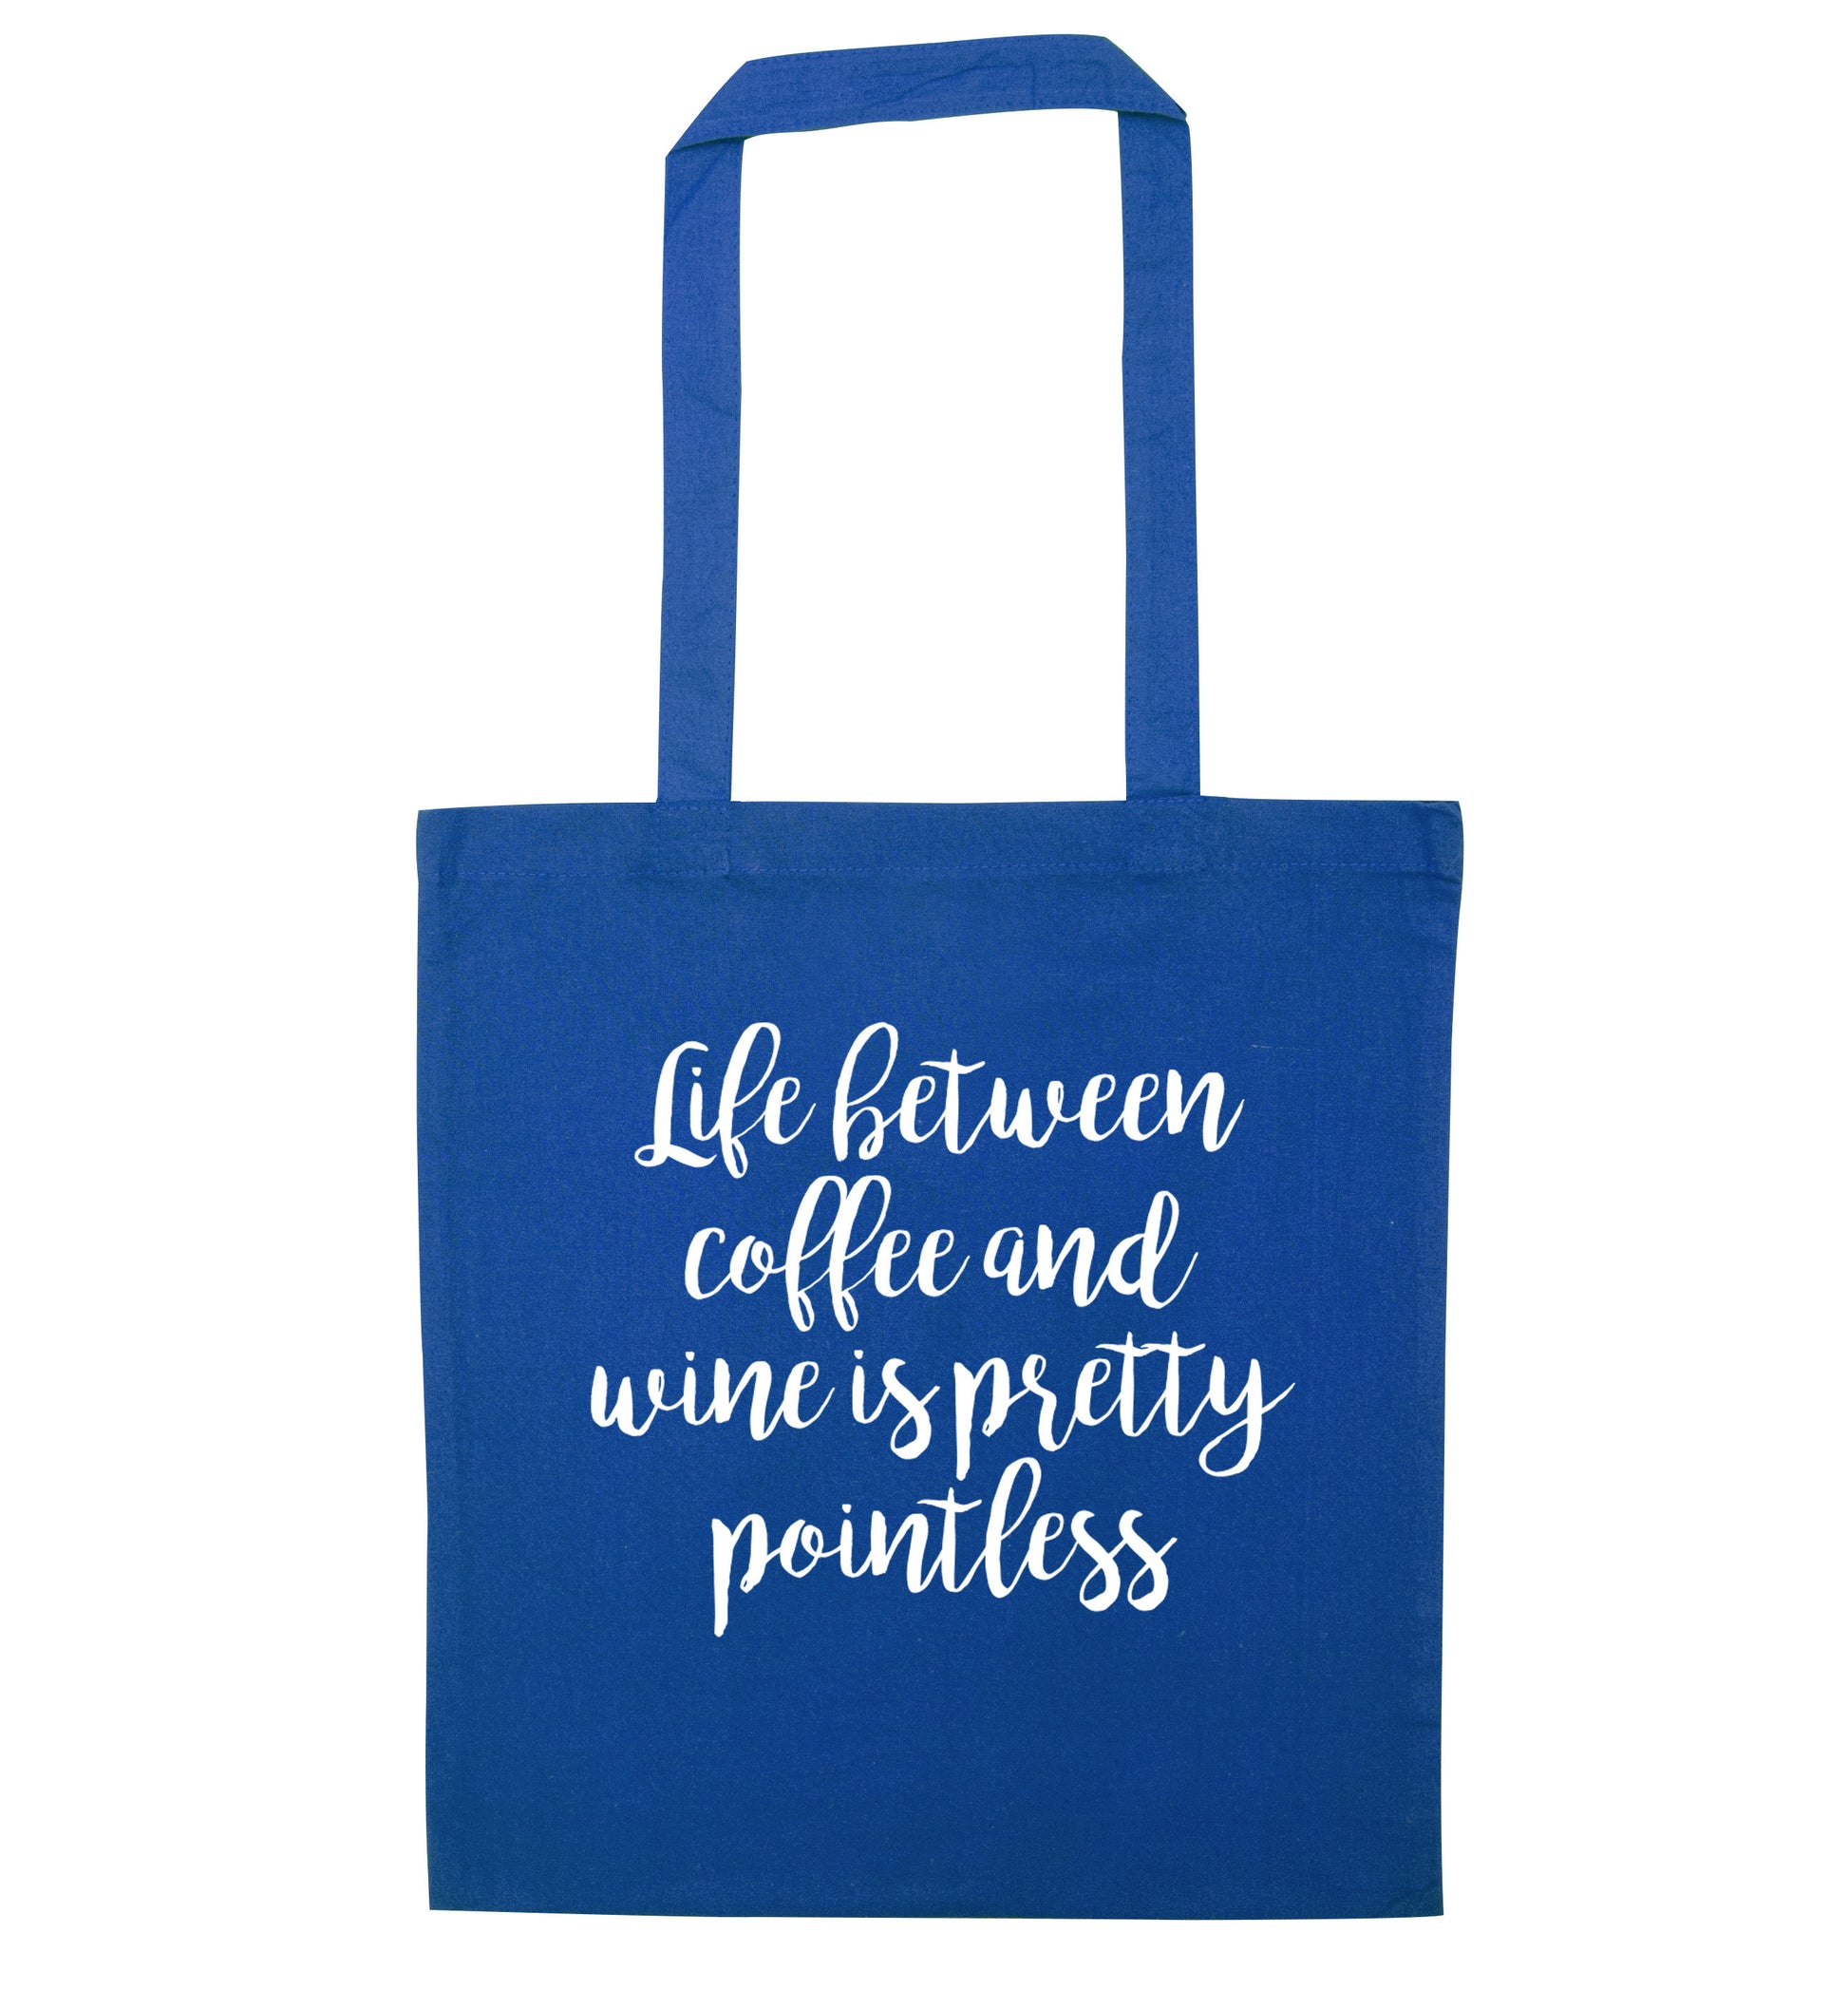 Life between coffee and wine is pretty pointless blue tote bag